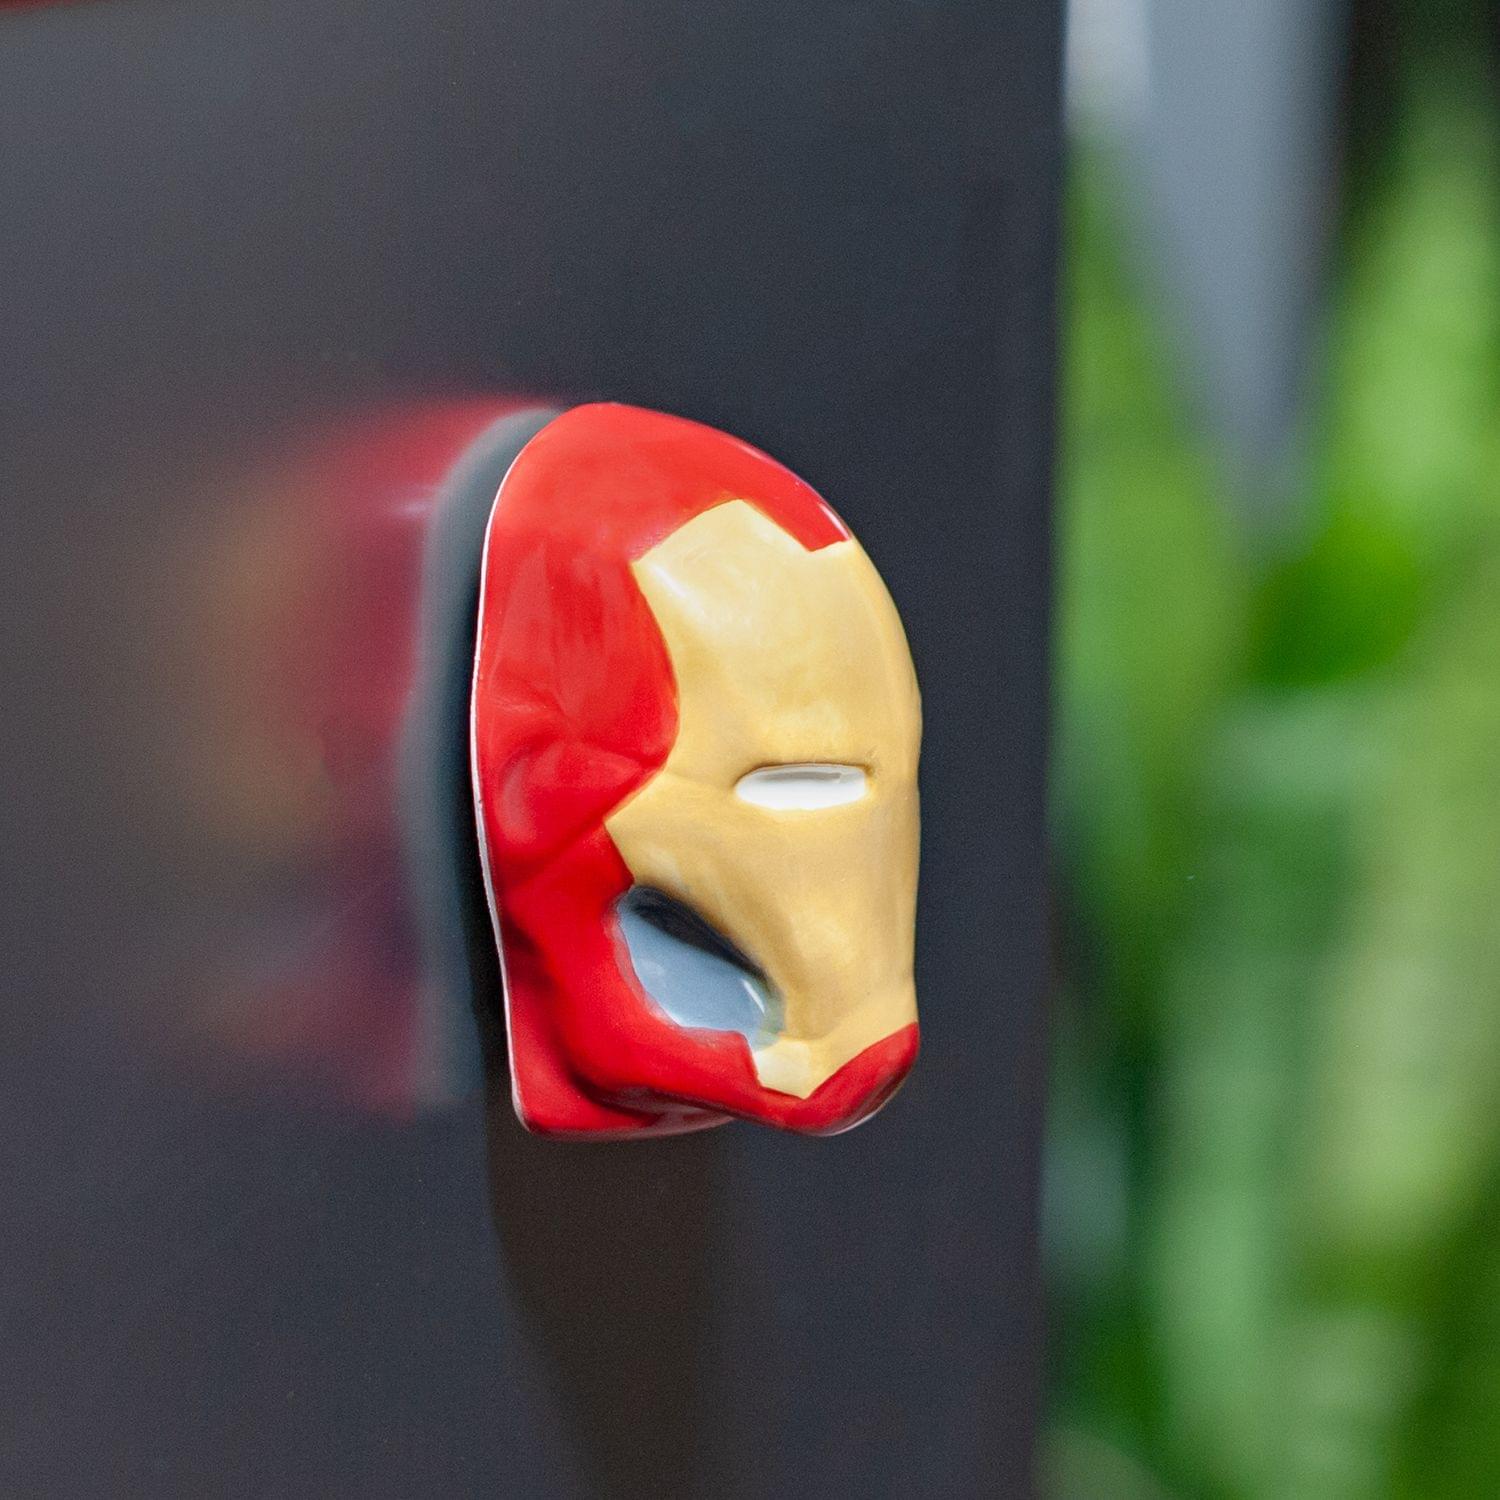 Iron Man Refrigerator Magnet | 3D Superhero Collectible Magnet | 2 Inches Tall